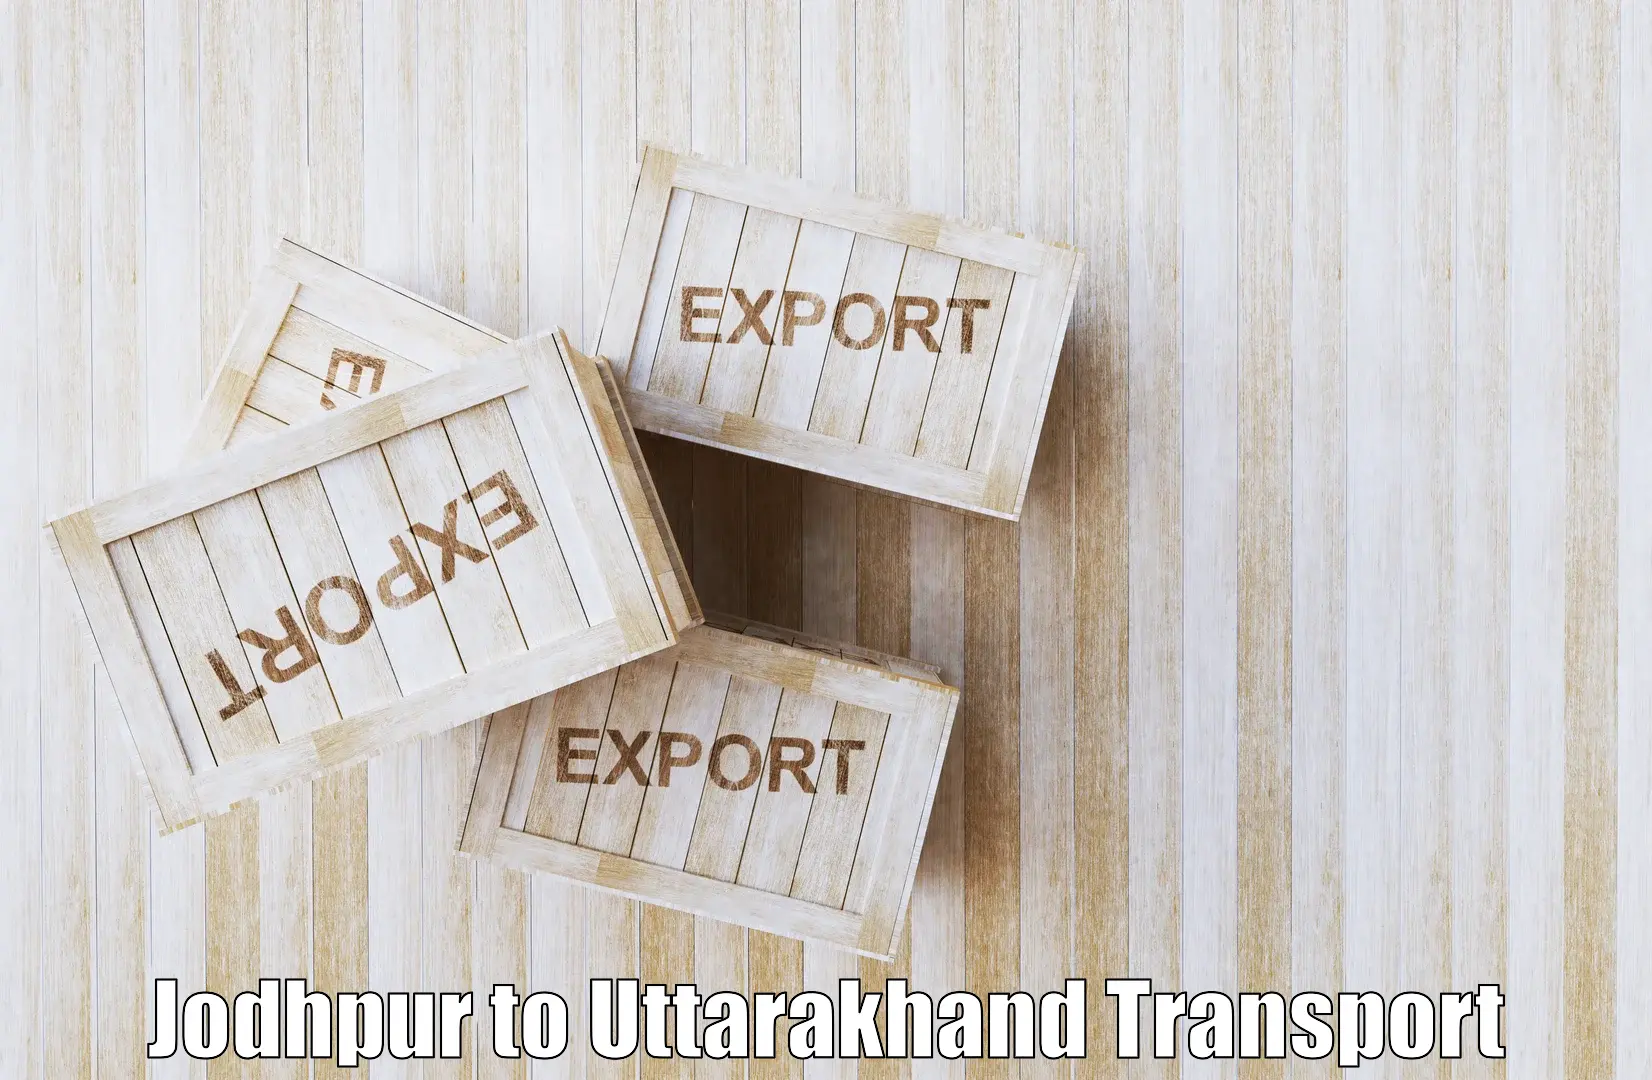 Container transport service Jodhpur to Champawat